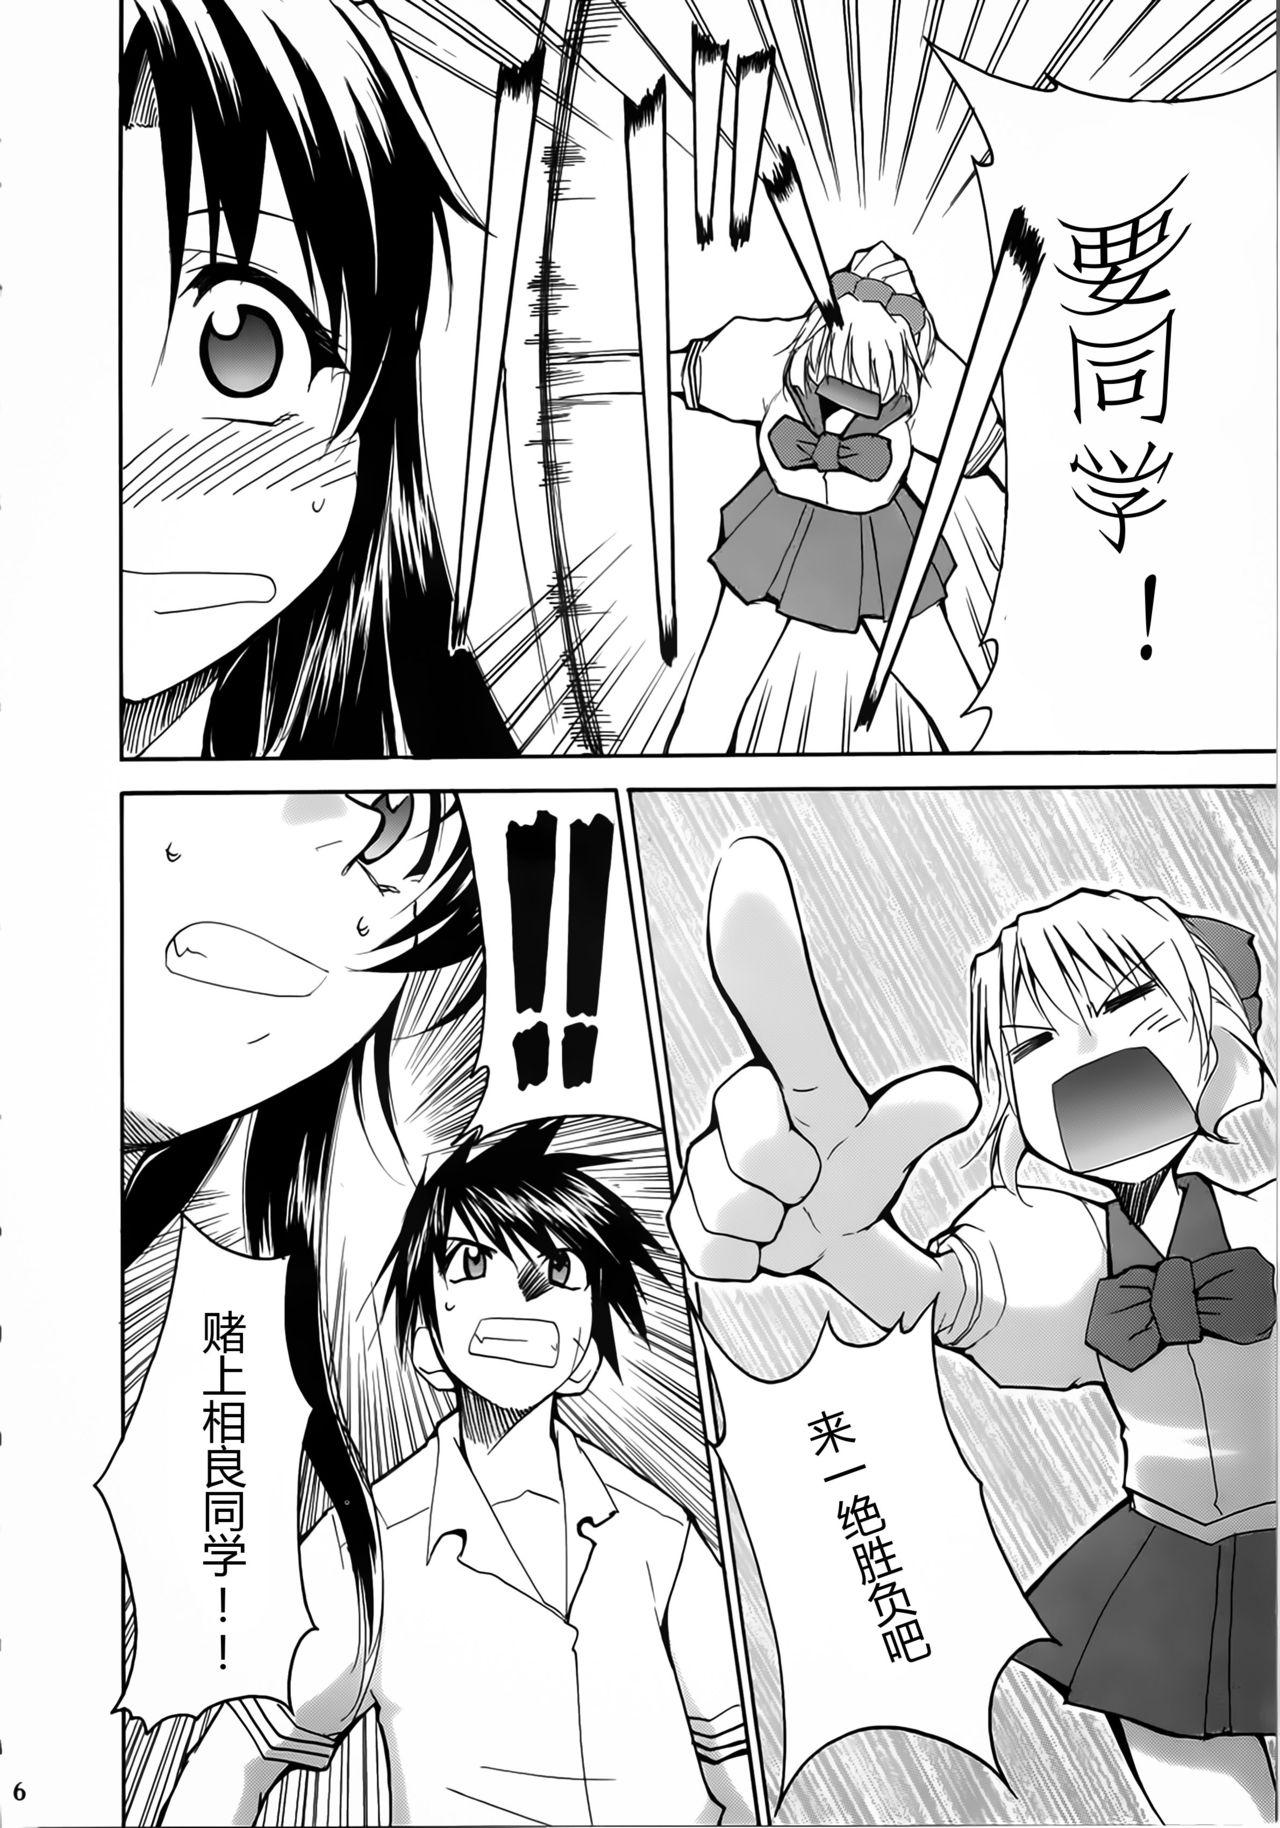 Busty FULL METAL 2 - Full metal panic Publico - Page 7